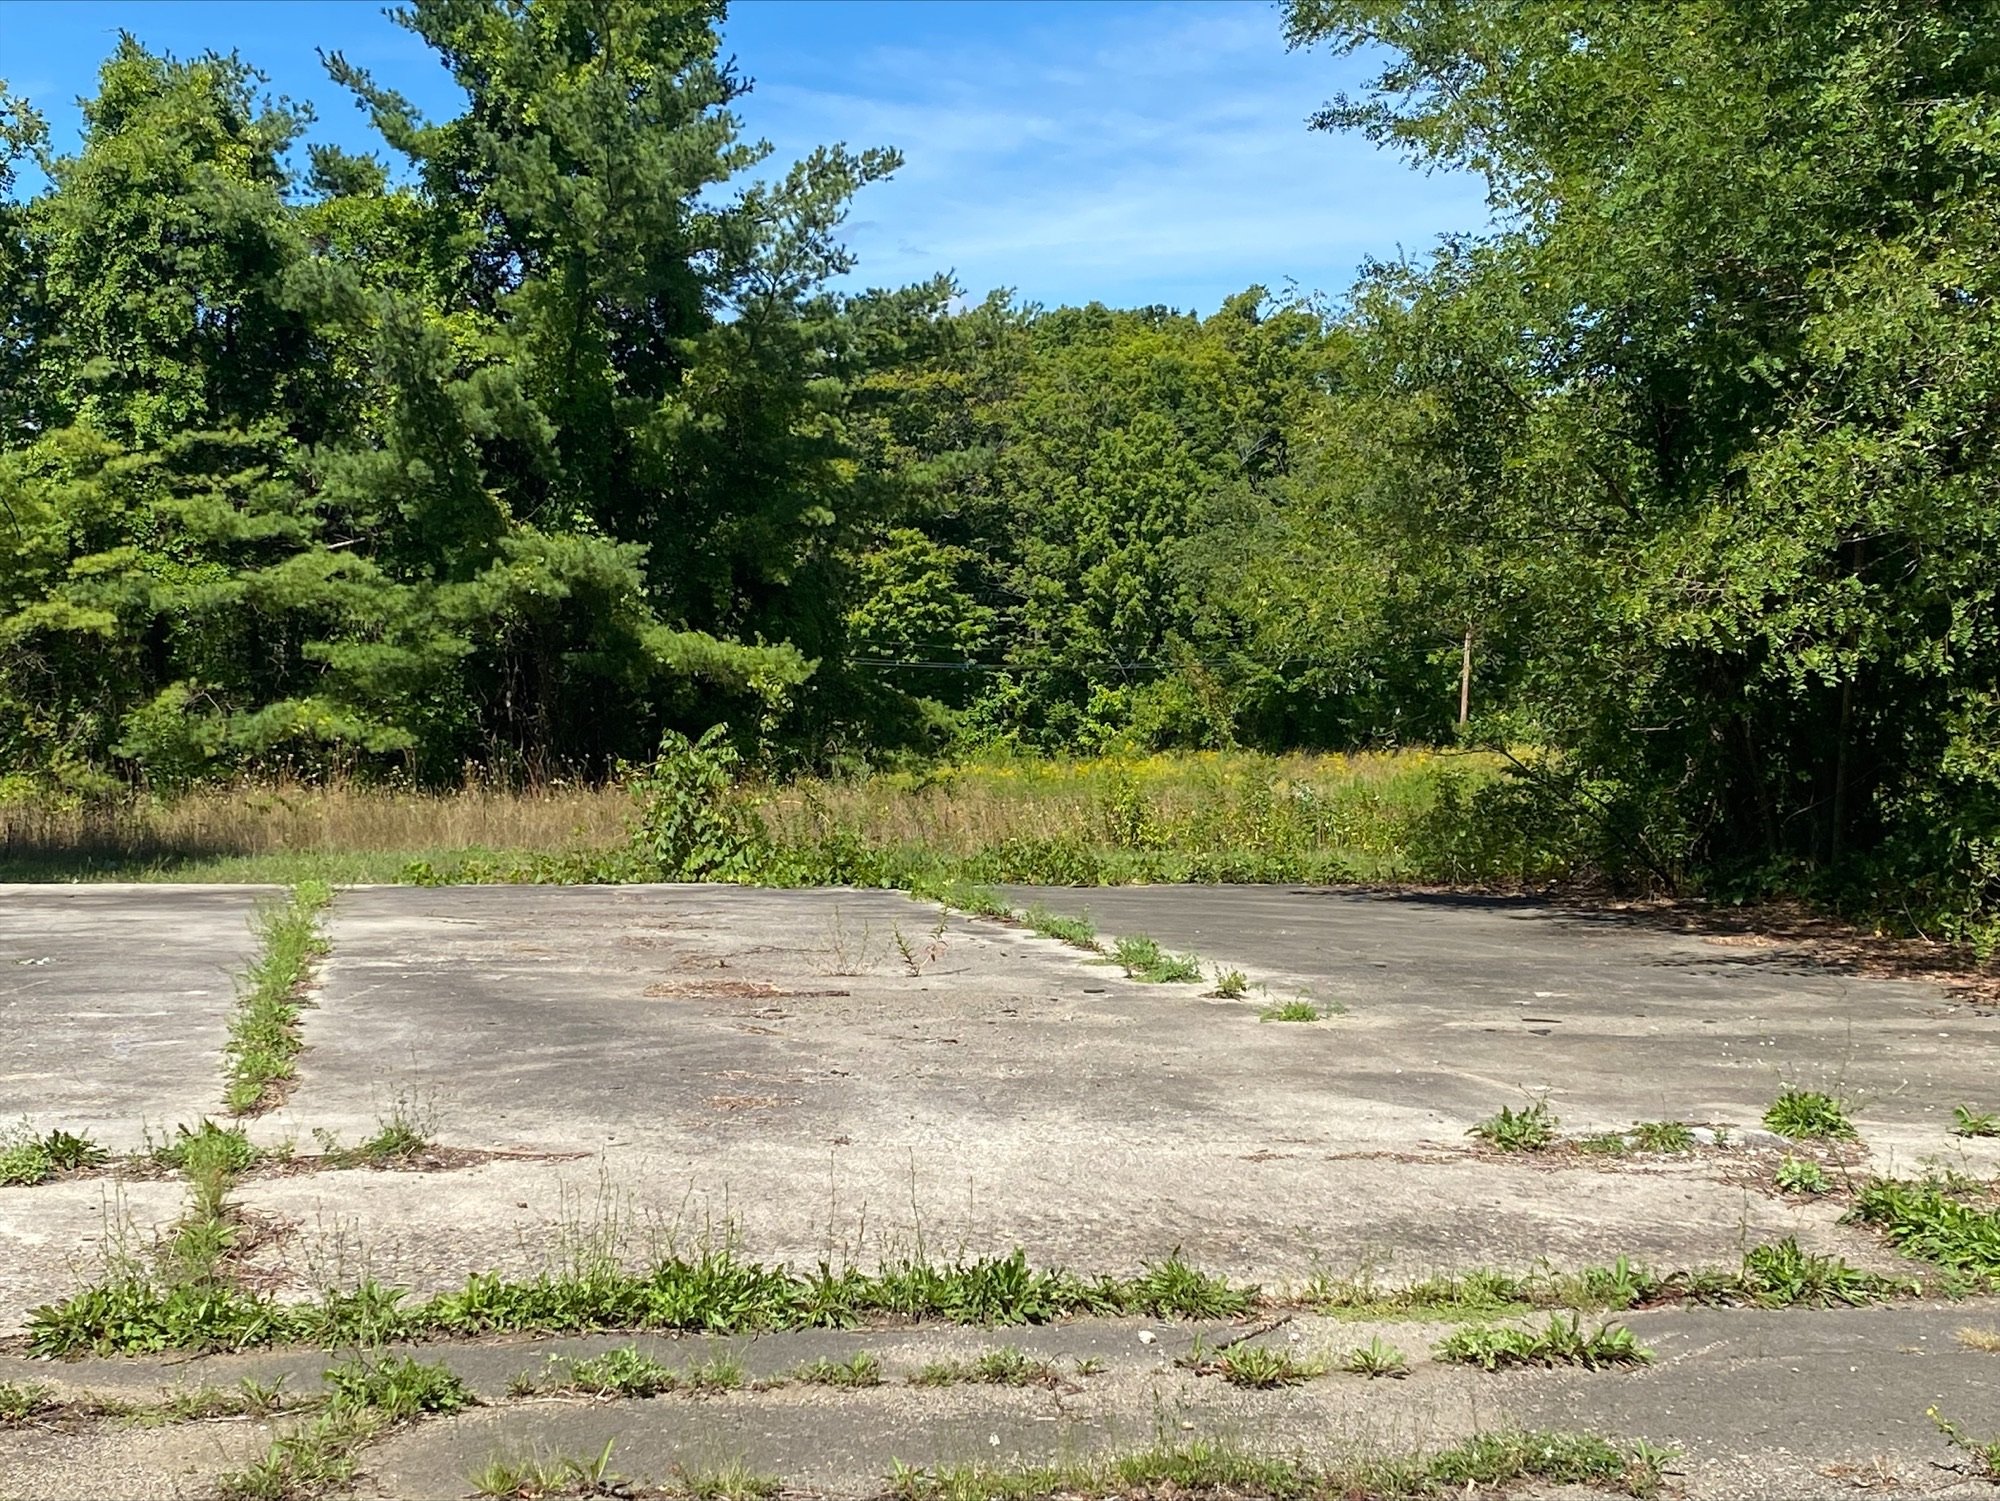 Concrete pad from former industrial building